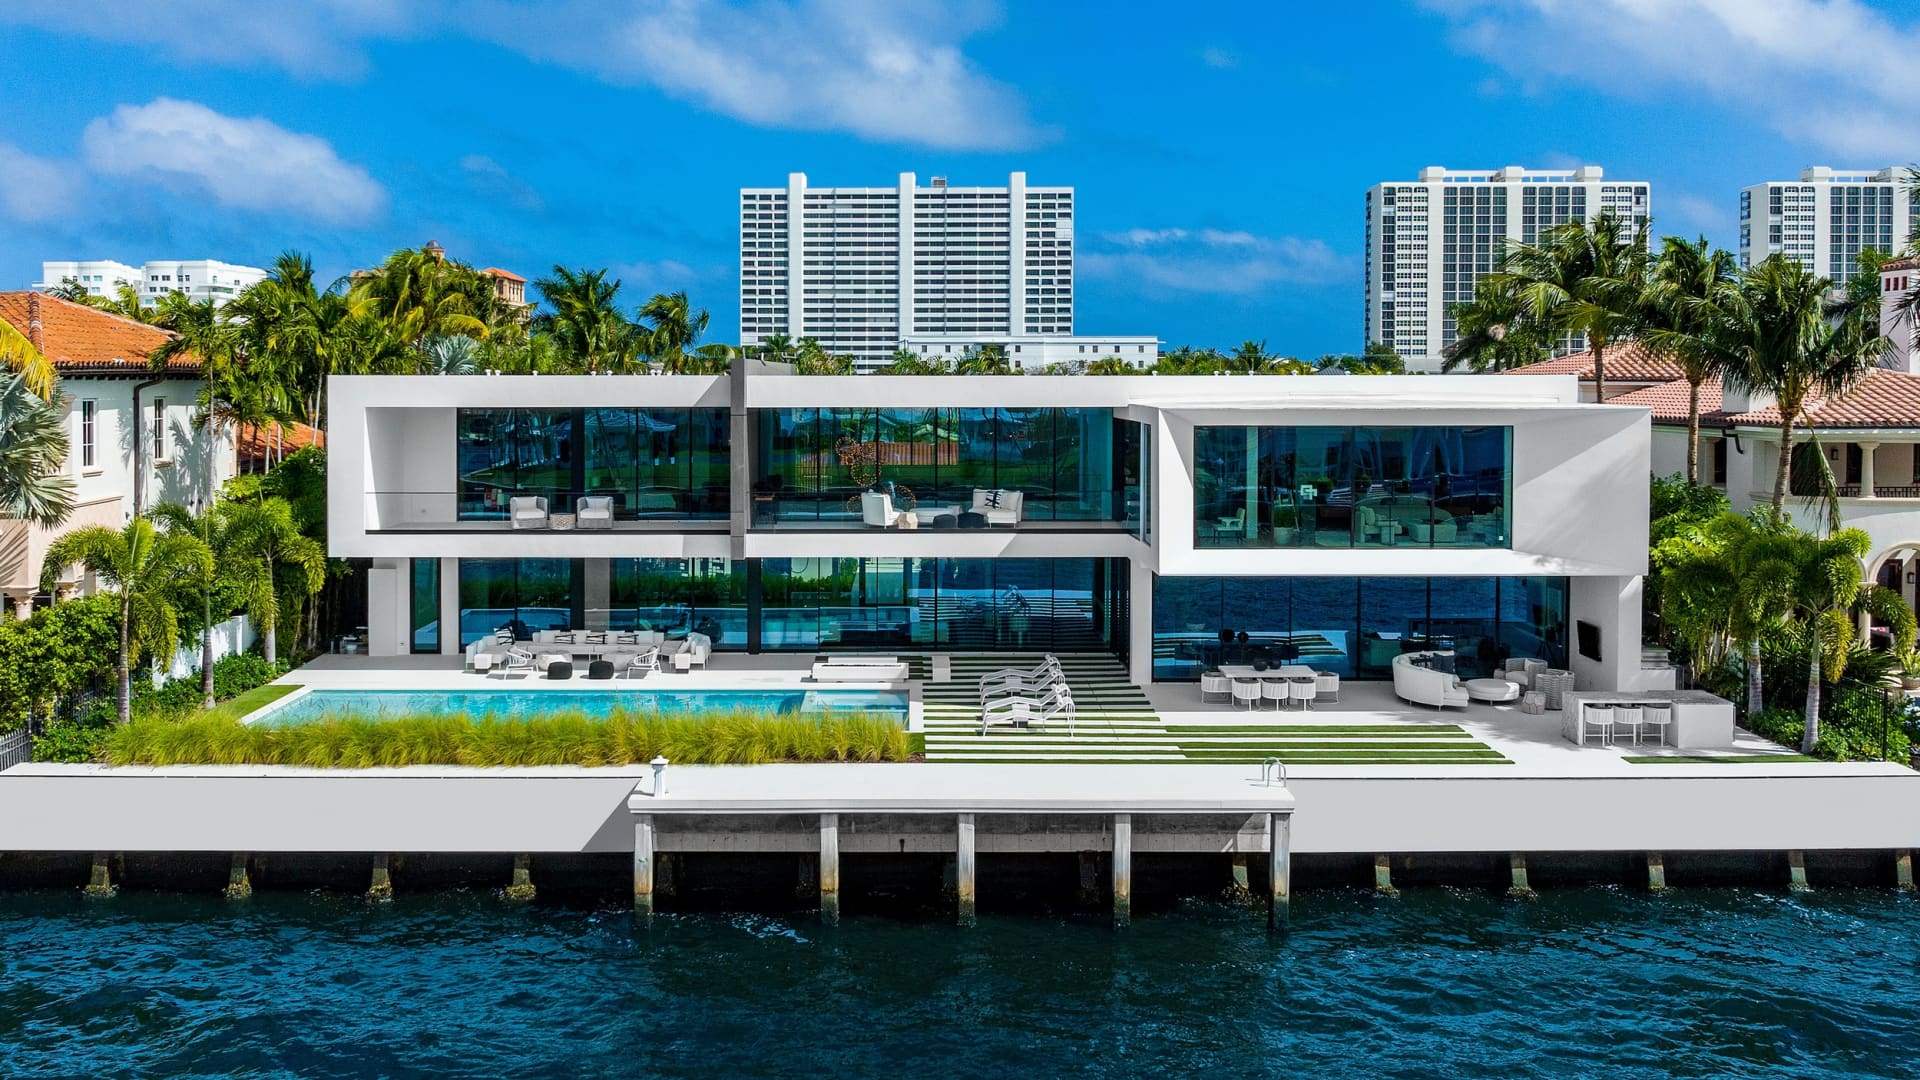 The $28.5 million mansion that recently hit the market in Boca Raton, FL located at 2633 Spanish River Rd.